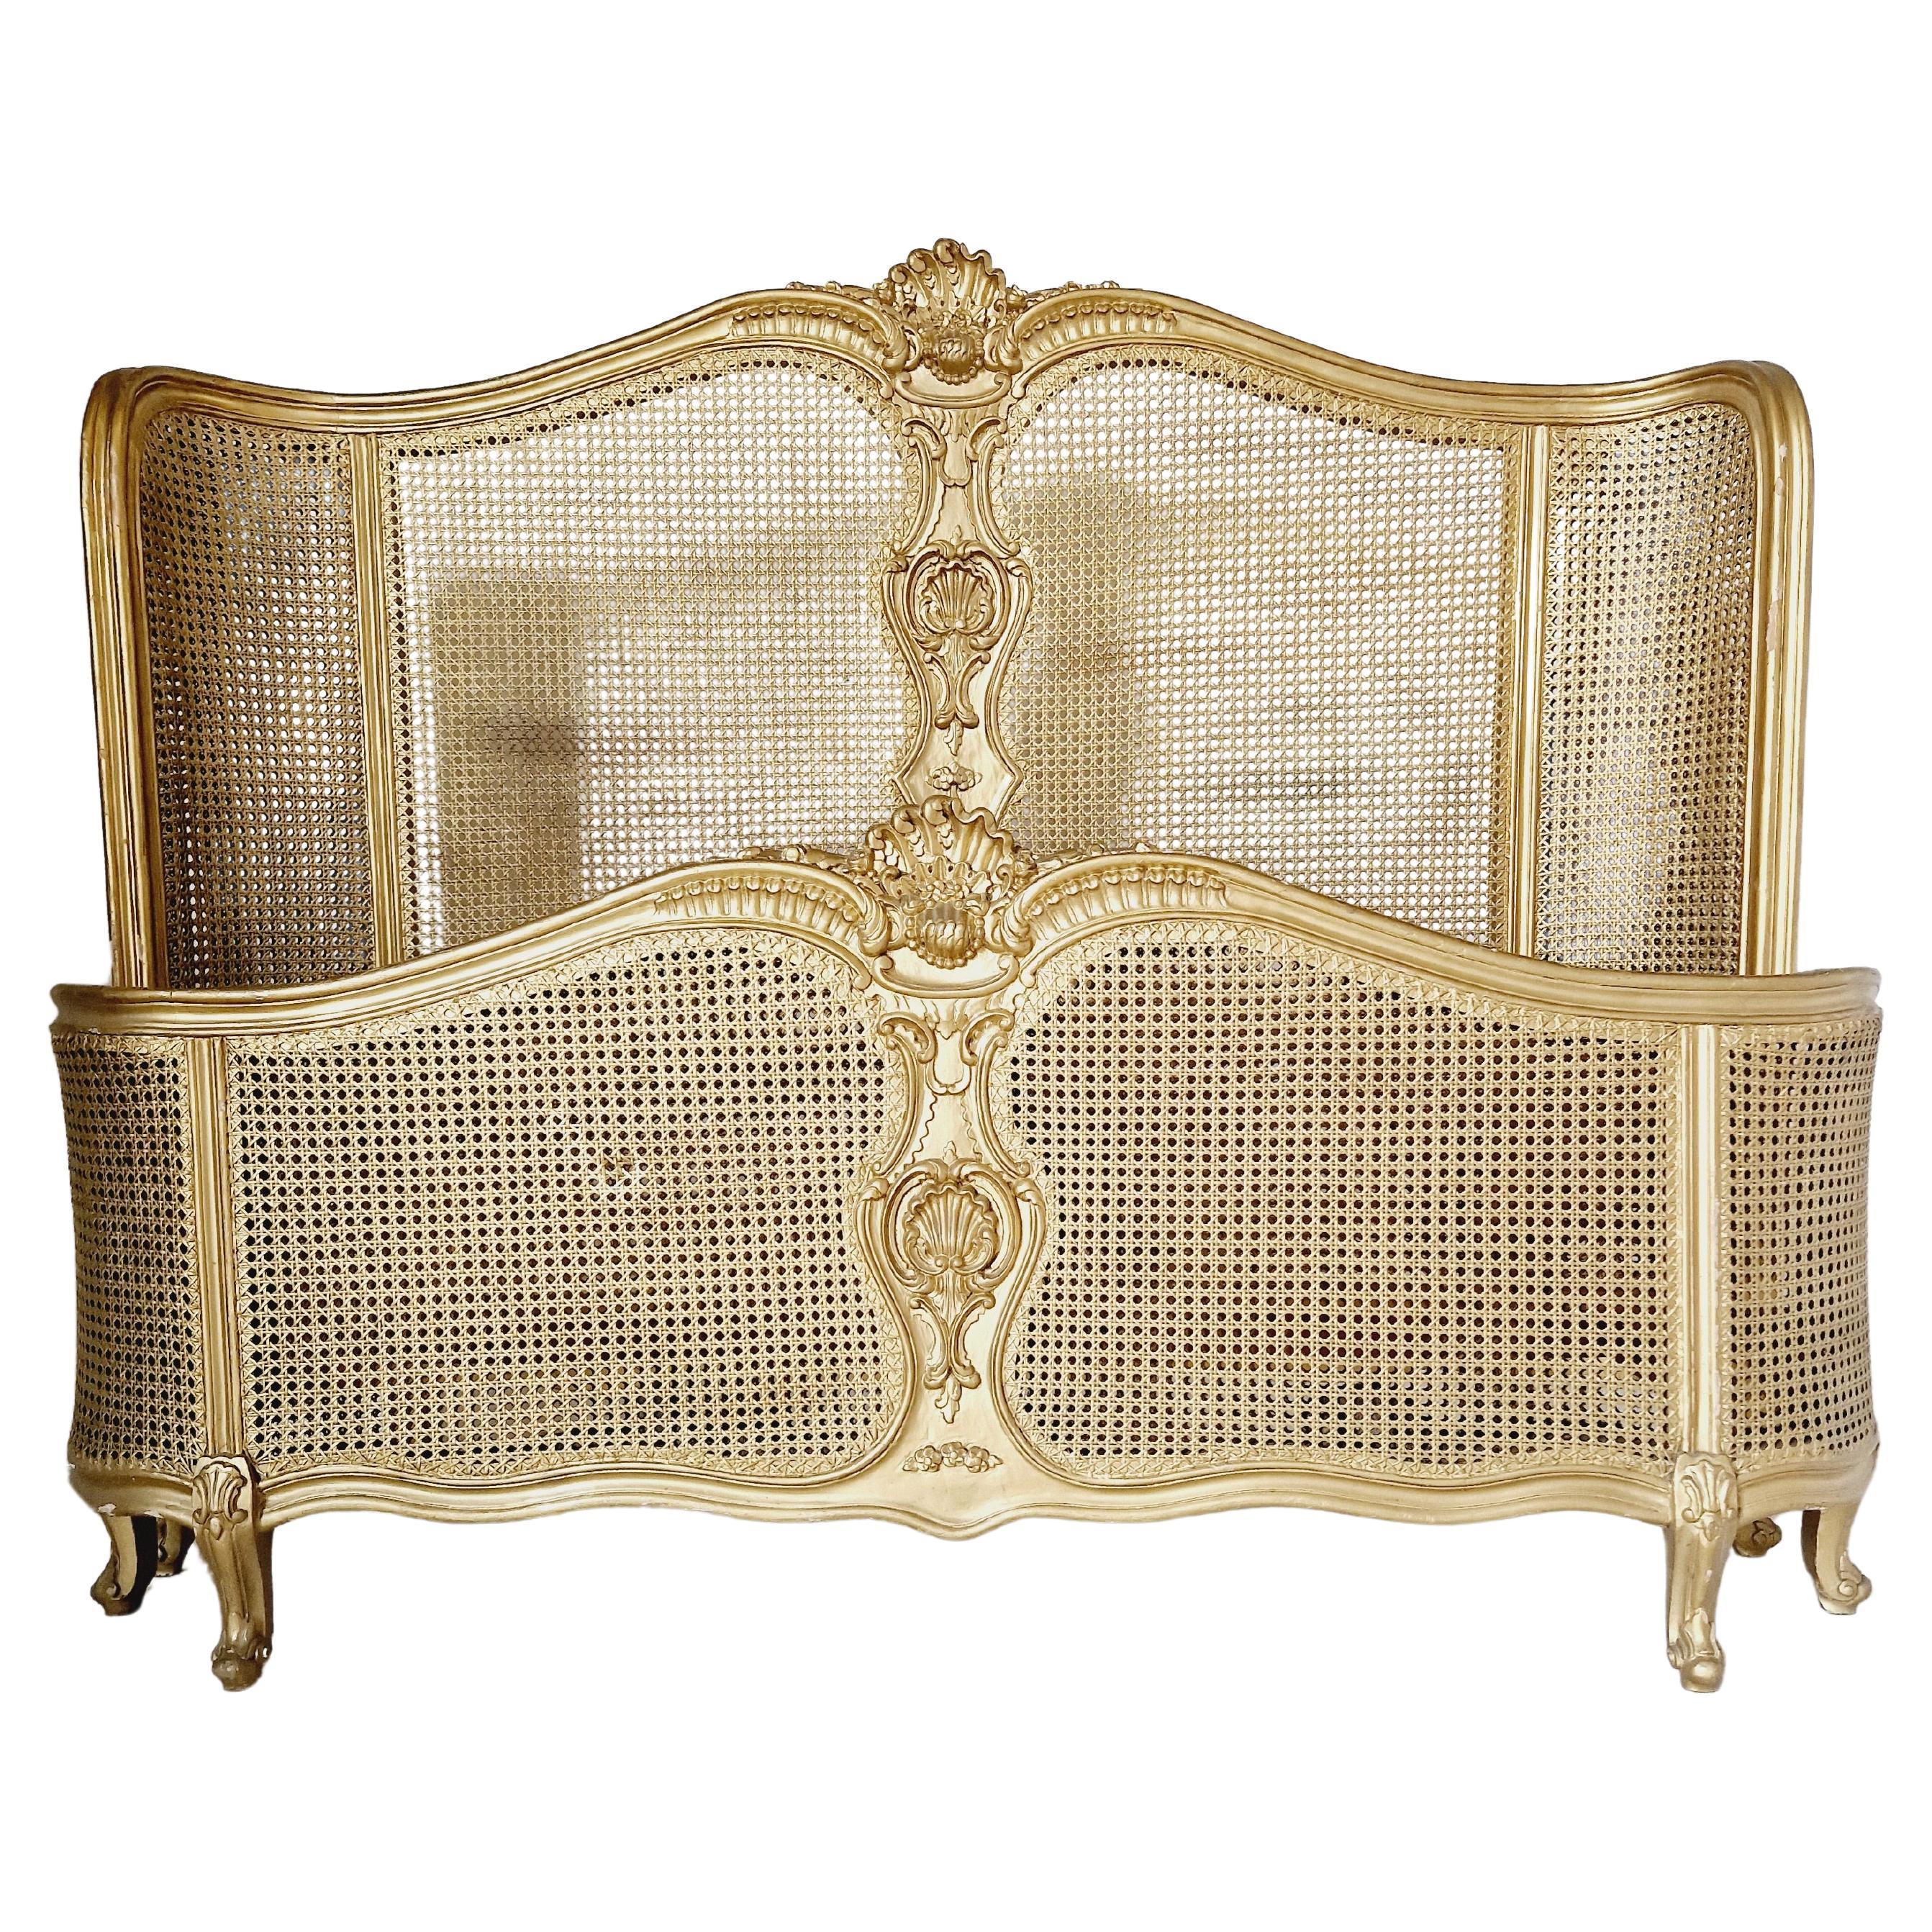 French Cane Bed Louis XV Style in Gold Lacquer